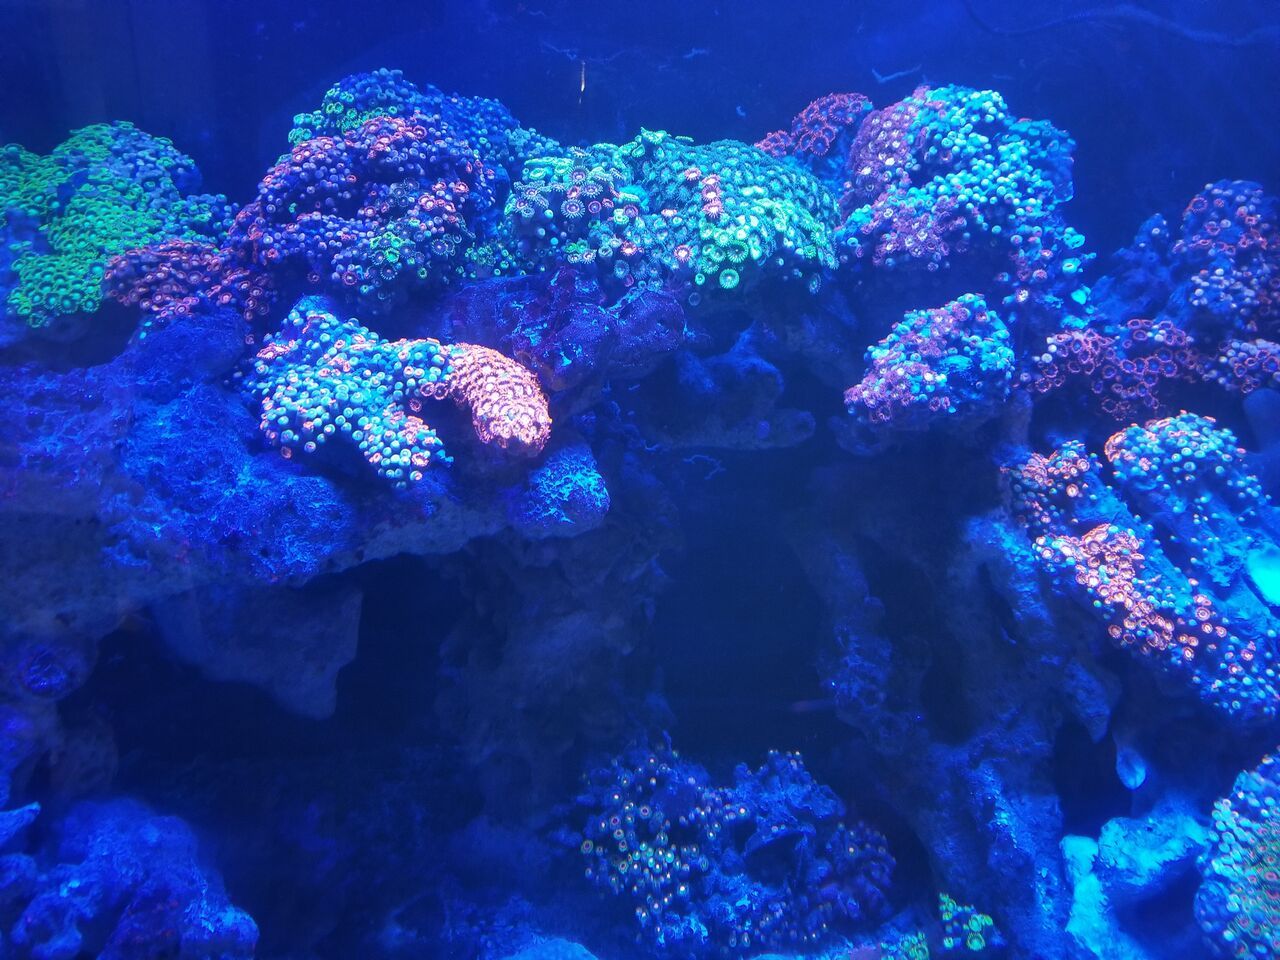 20180124 114755 preview zpsaawhqufj - Zoanthids Galore And A Whole Lot More!!! Best Deals!!